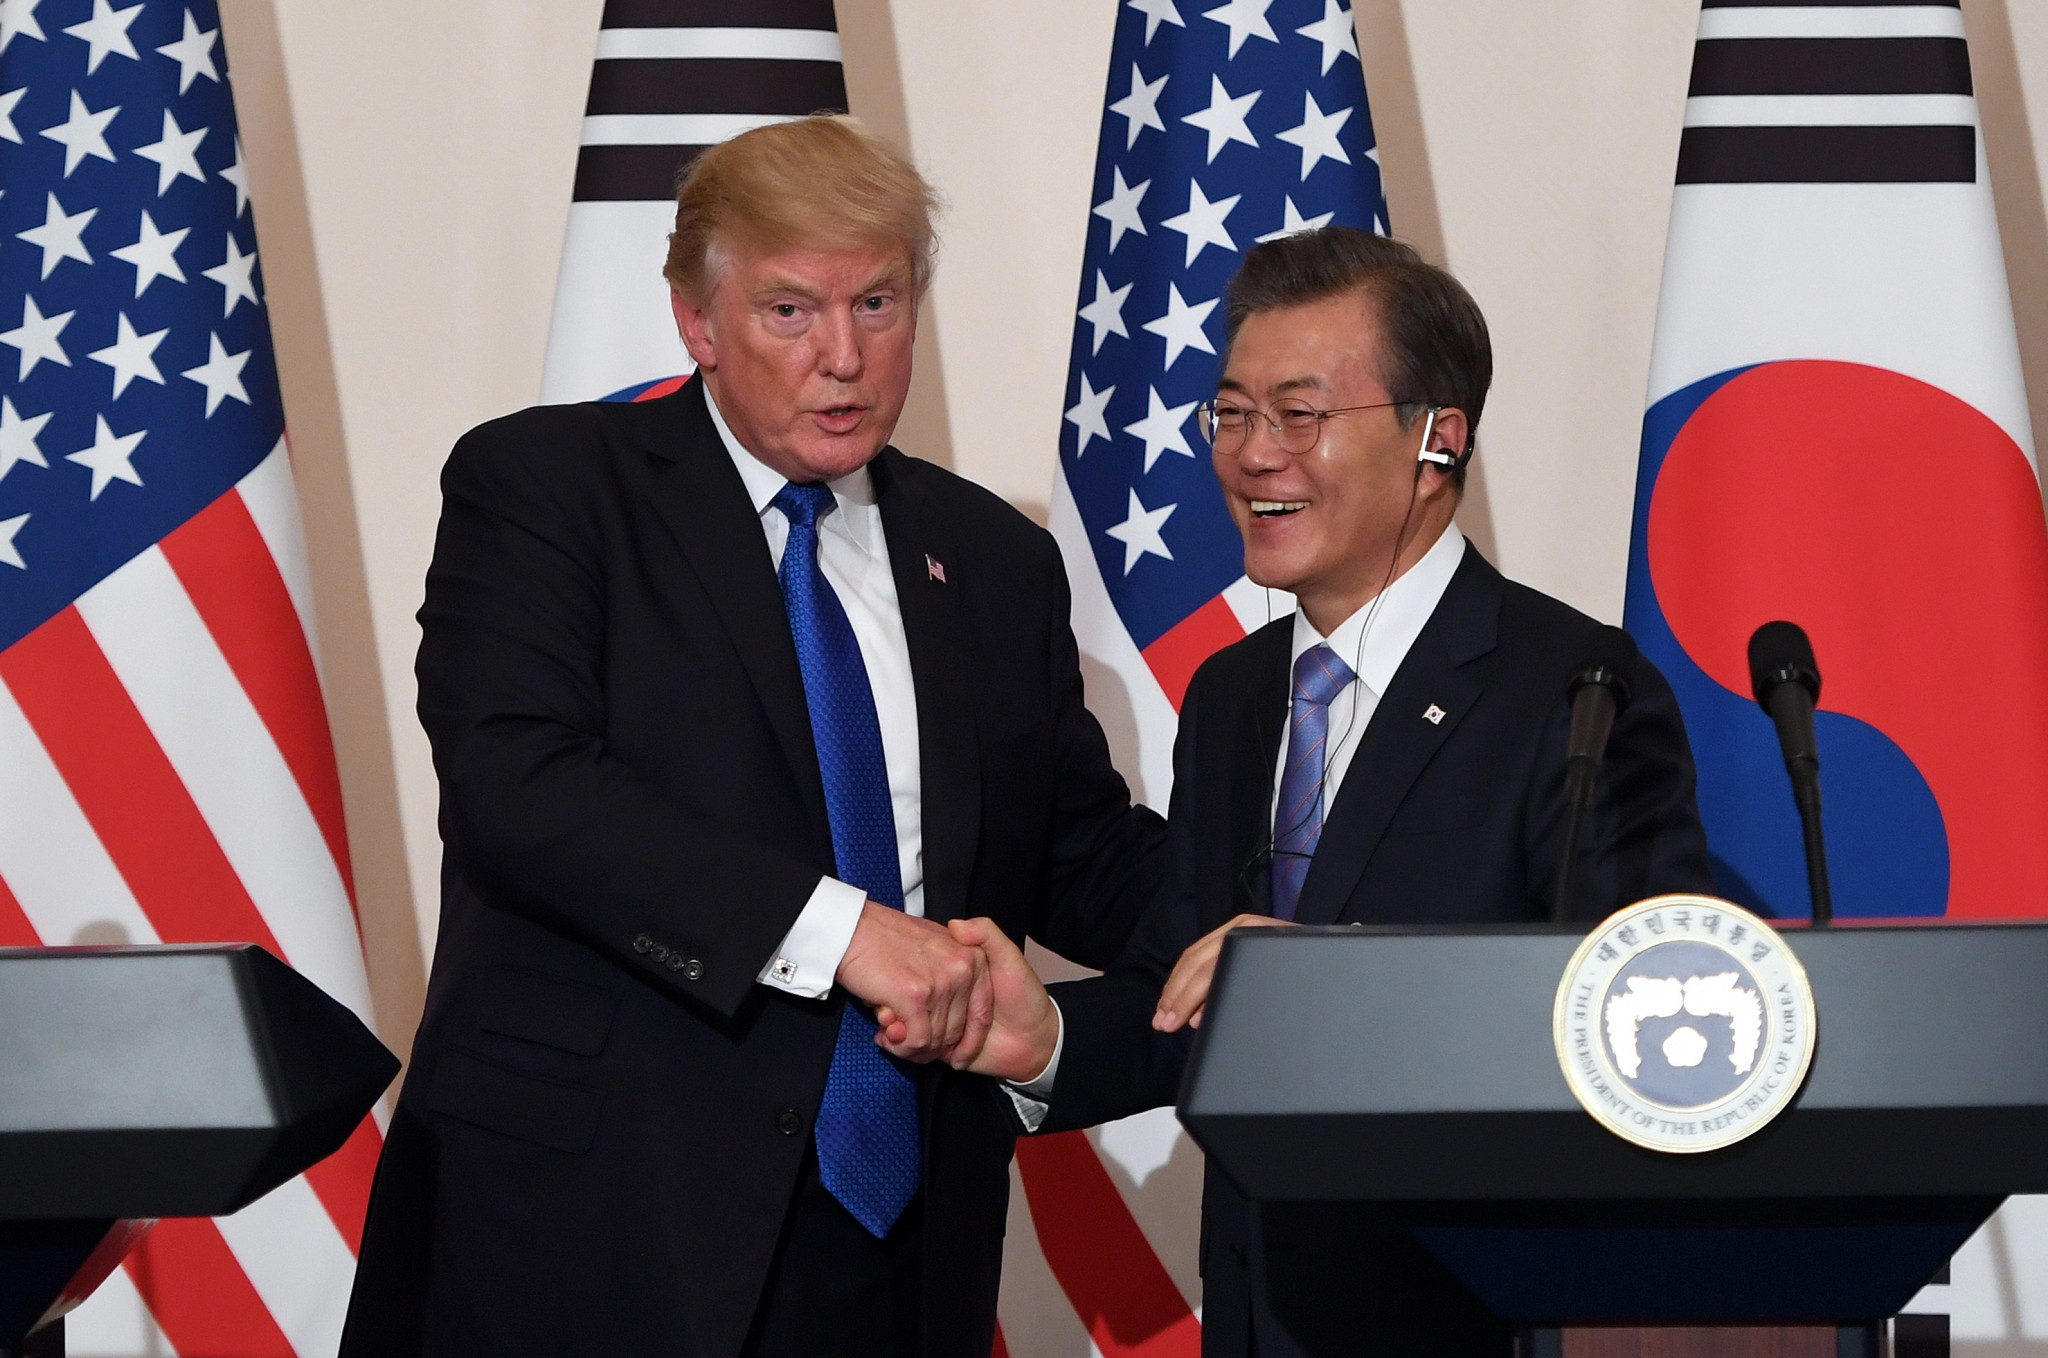 South Korea’s President Moon Jae-in has claimed that US counterpart Donald Trump has promised to help ensure the safety of the Pyeongchang 2018 Winter Olympic Games from North Korean threats ©Getty Images